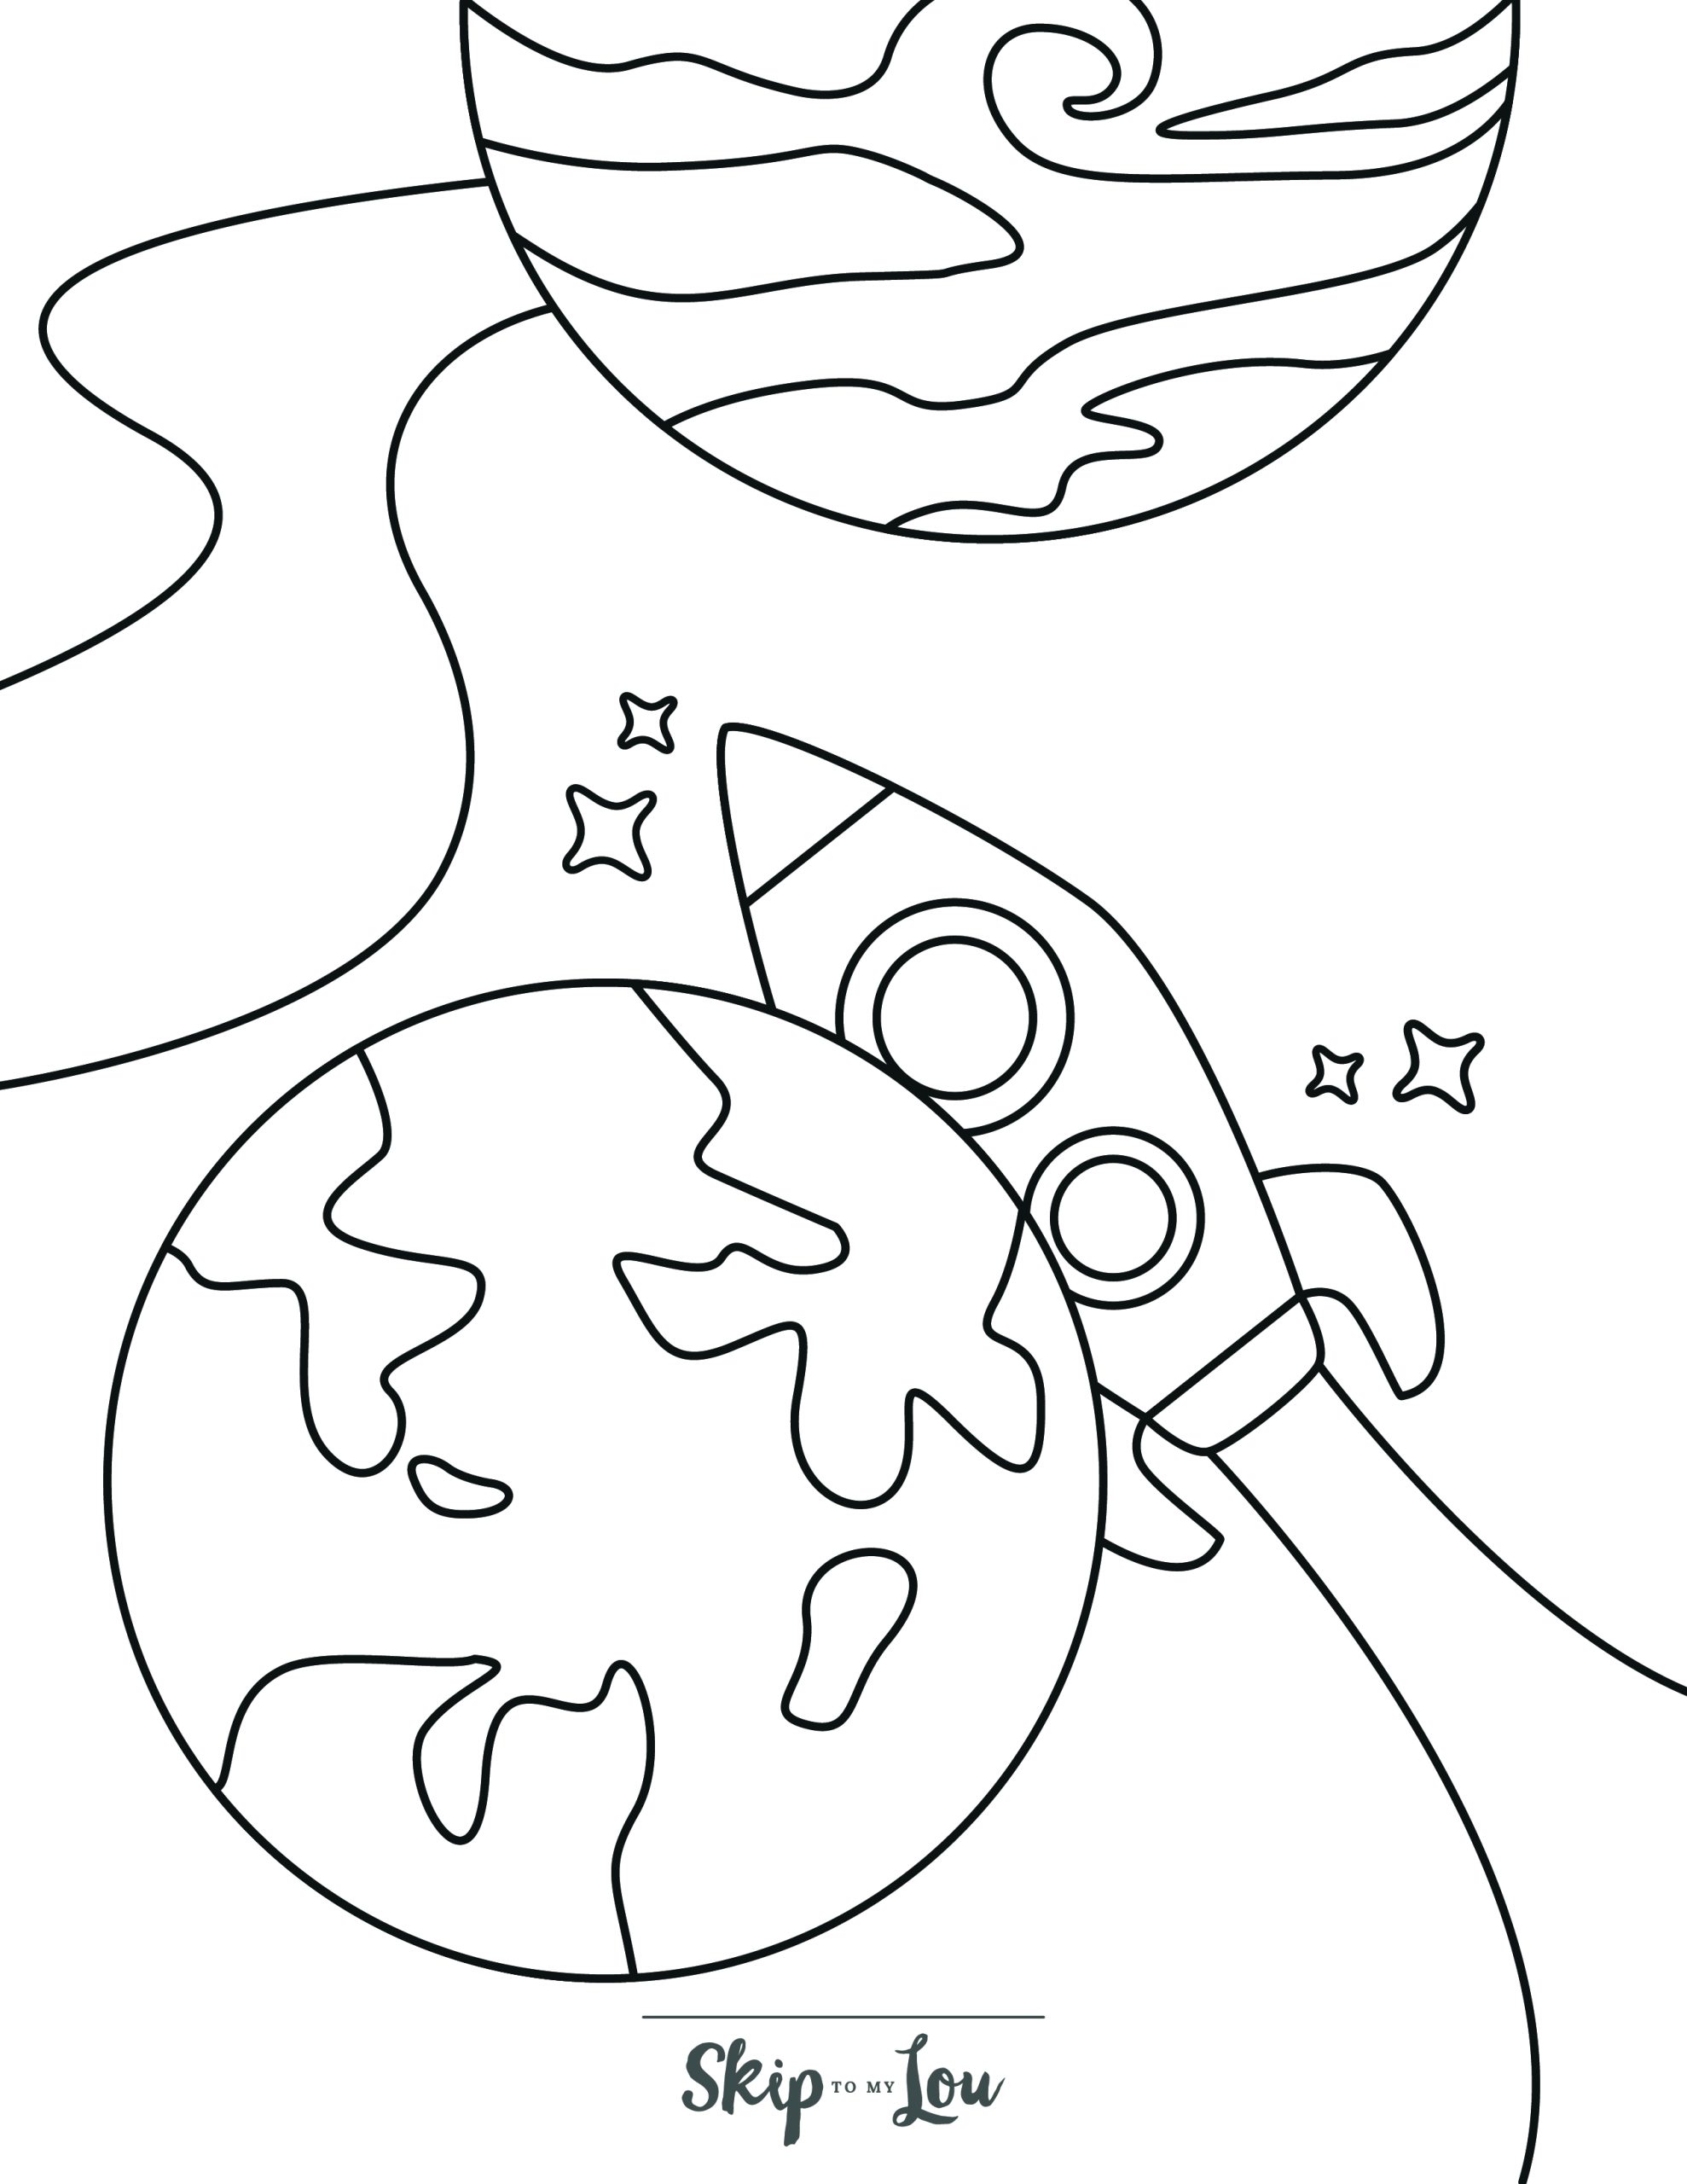 Space Coloring Page 8 - Planet with rocket flying behind